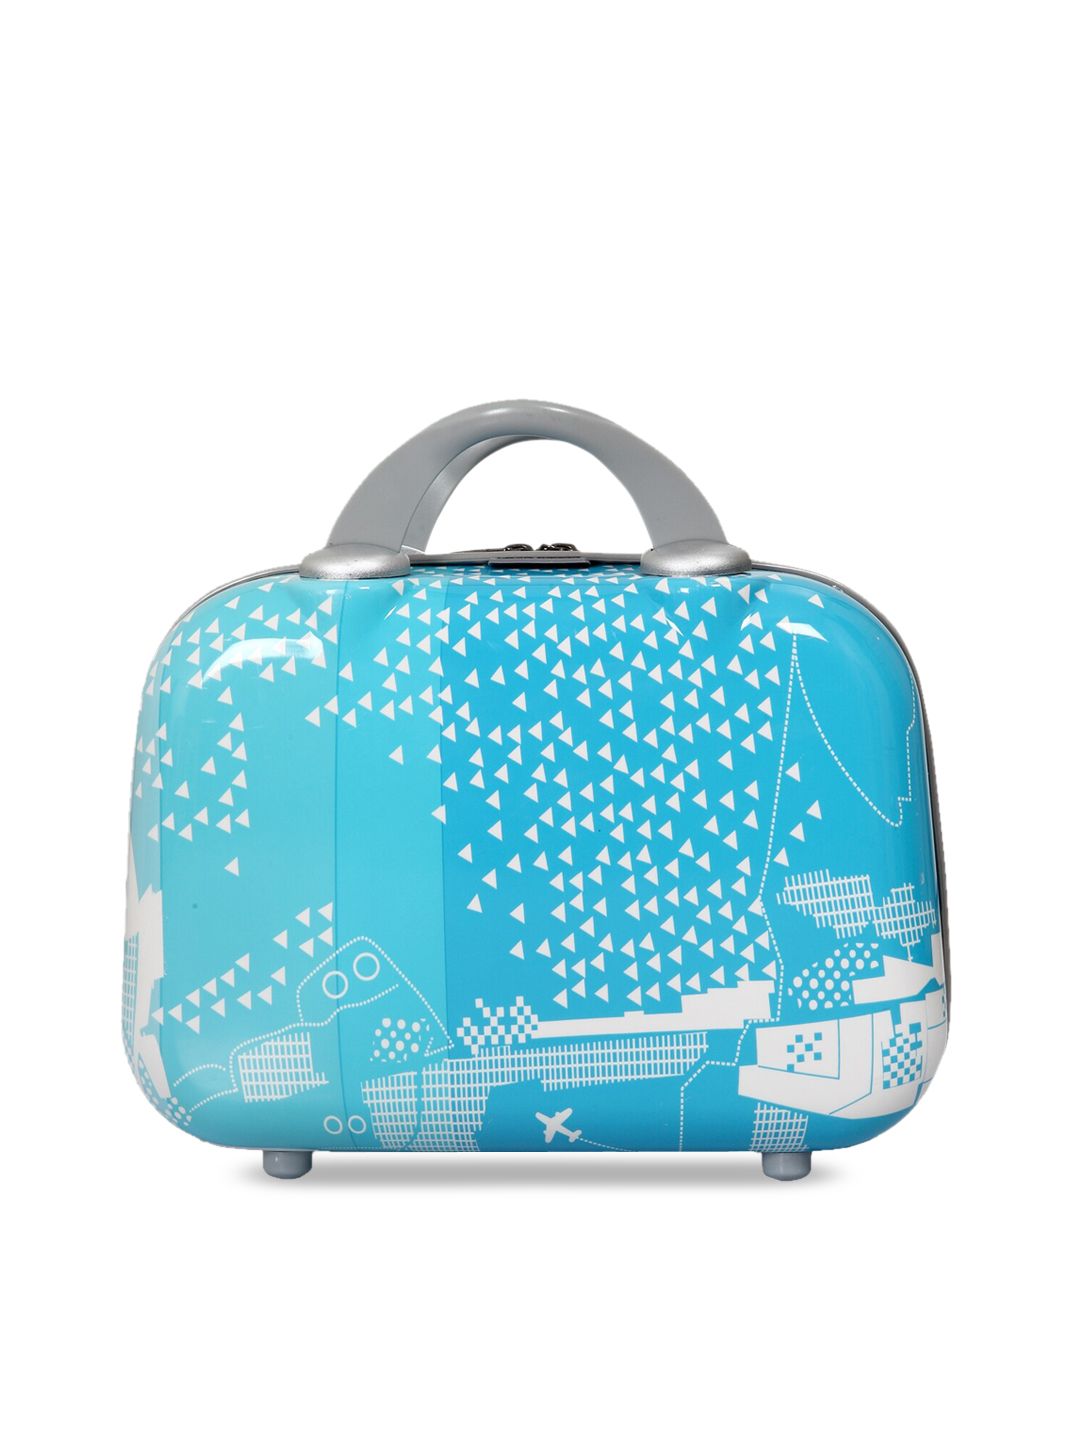 Polo Class Blue & White Printed Vanity Bag Price in India